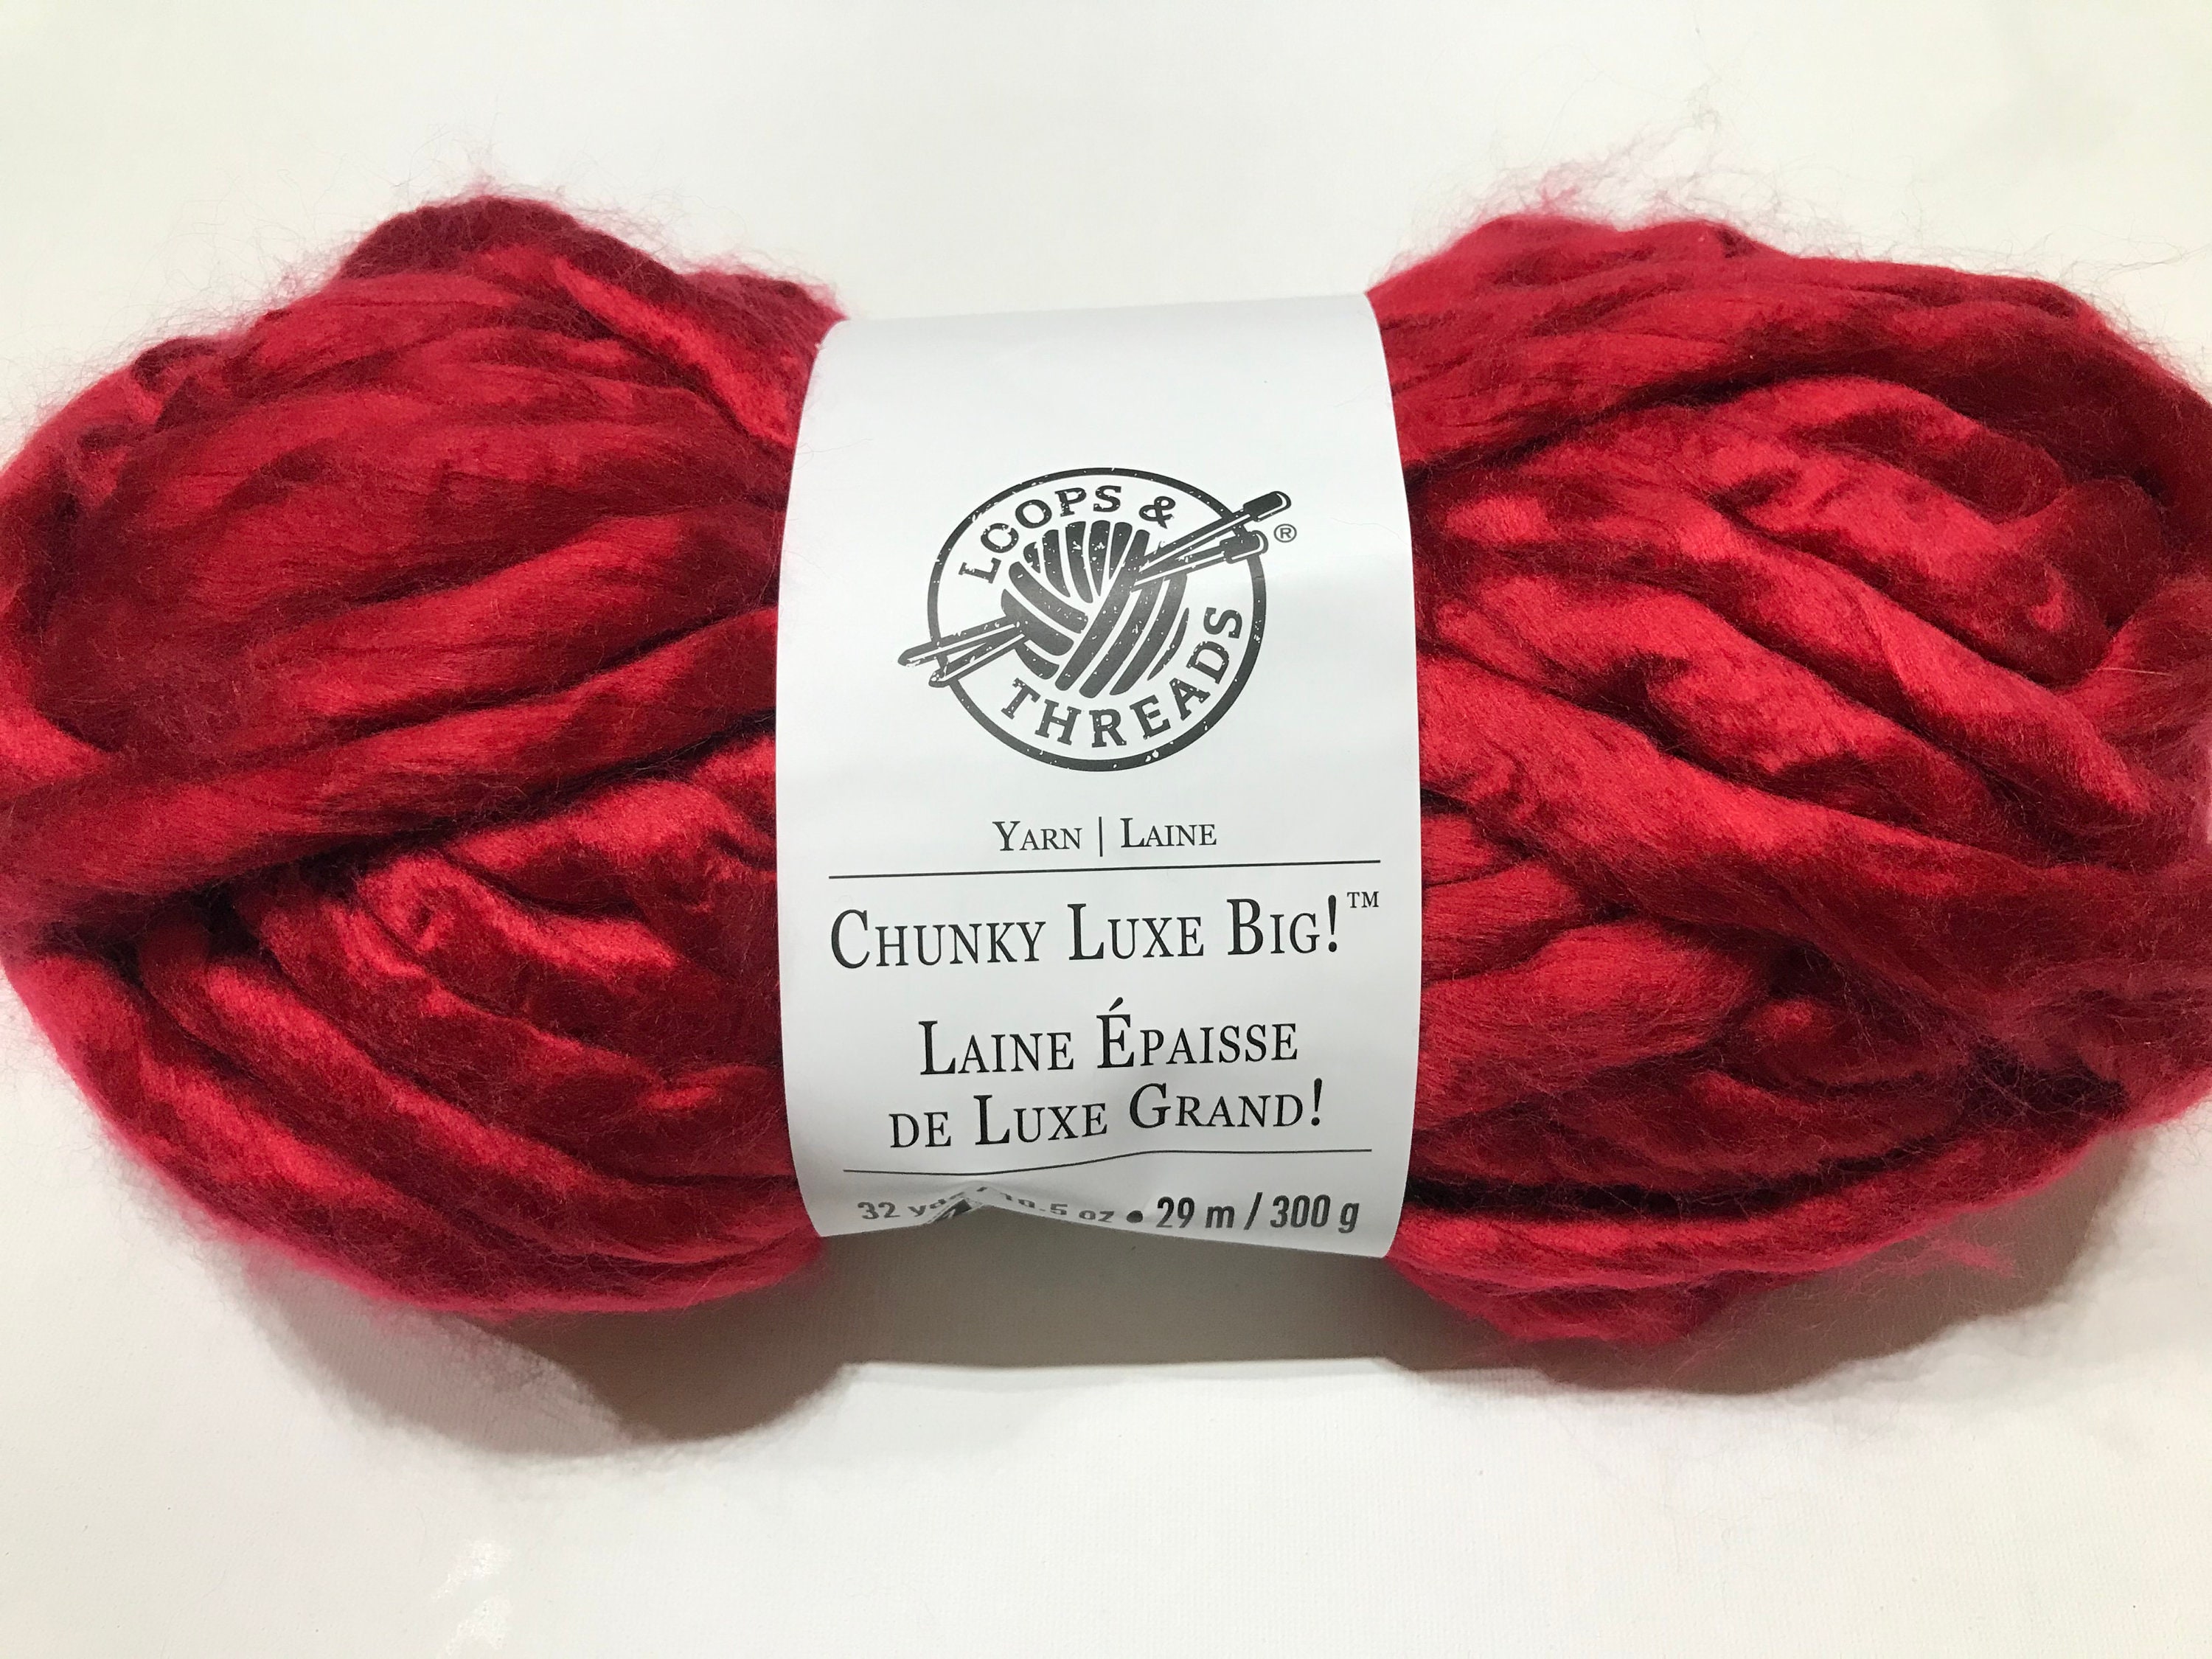 Loops and Threads Chunky Luxe Big, Red Yarn 